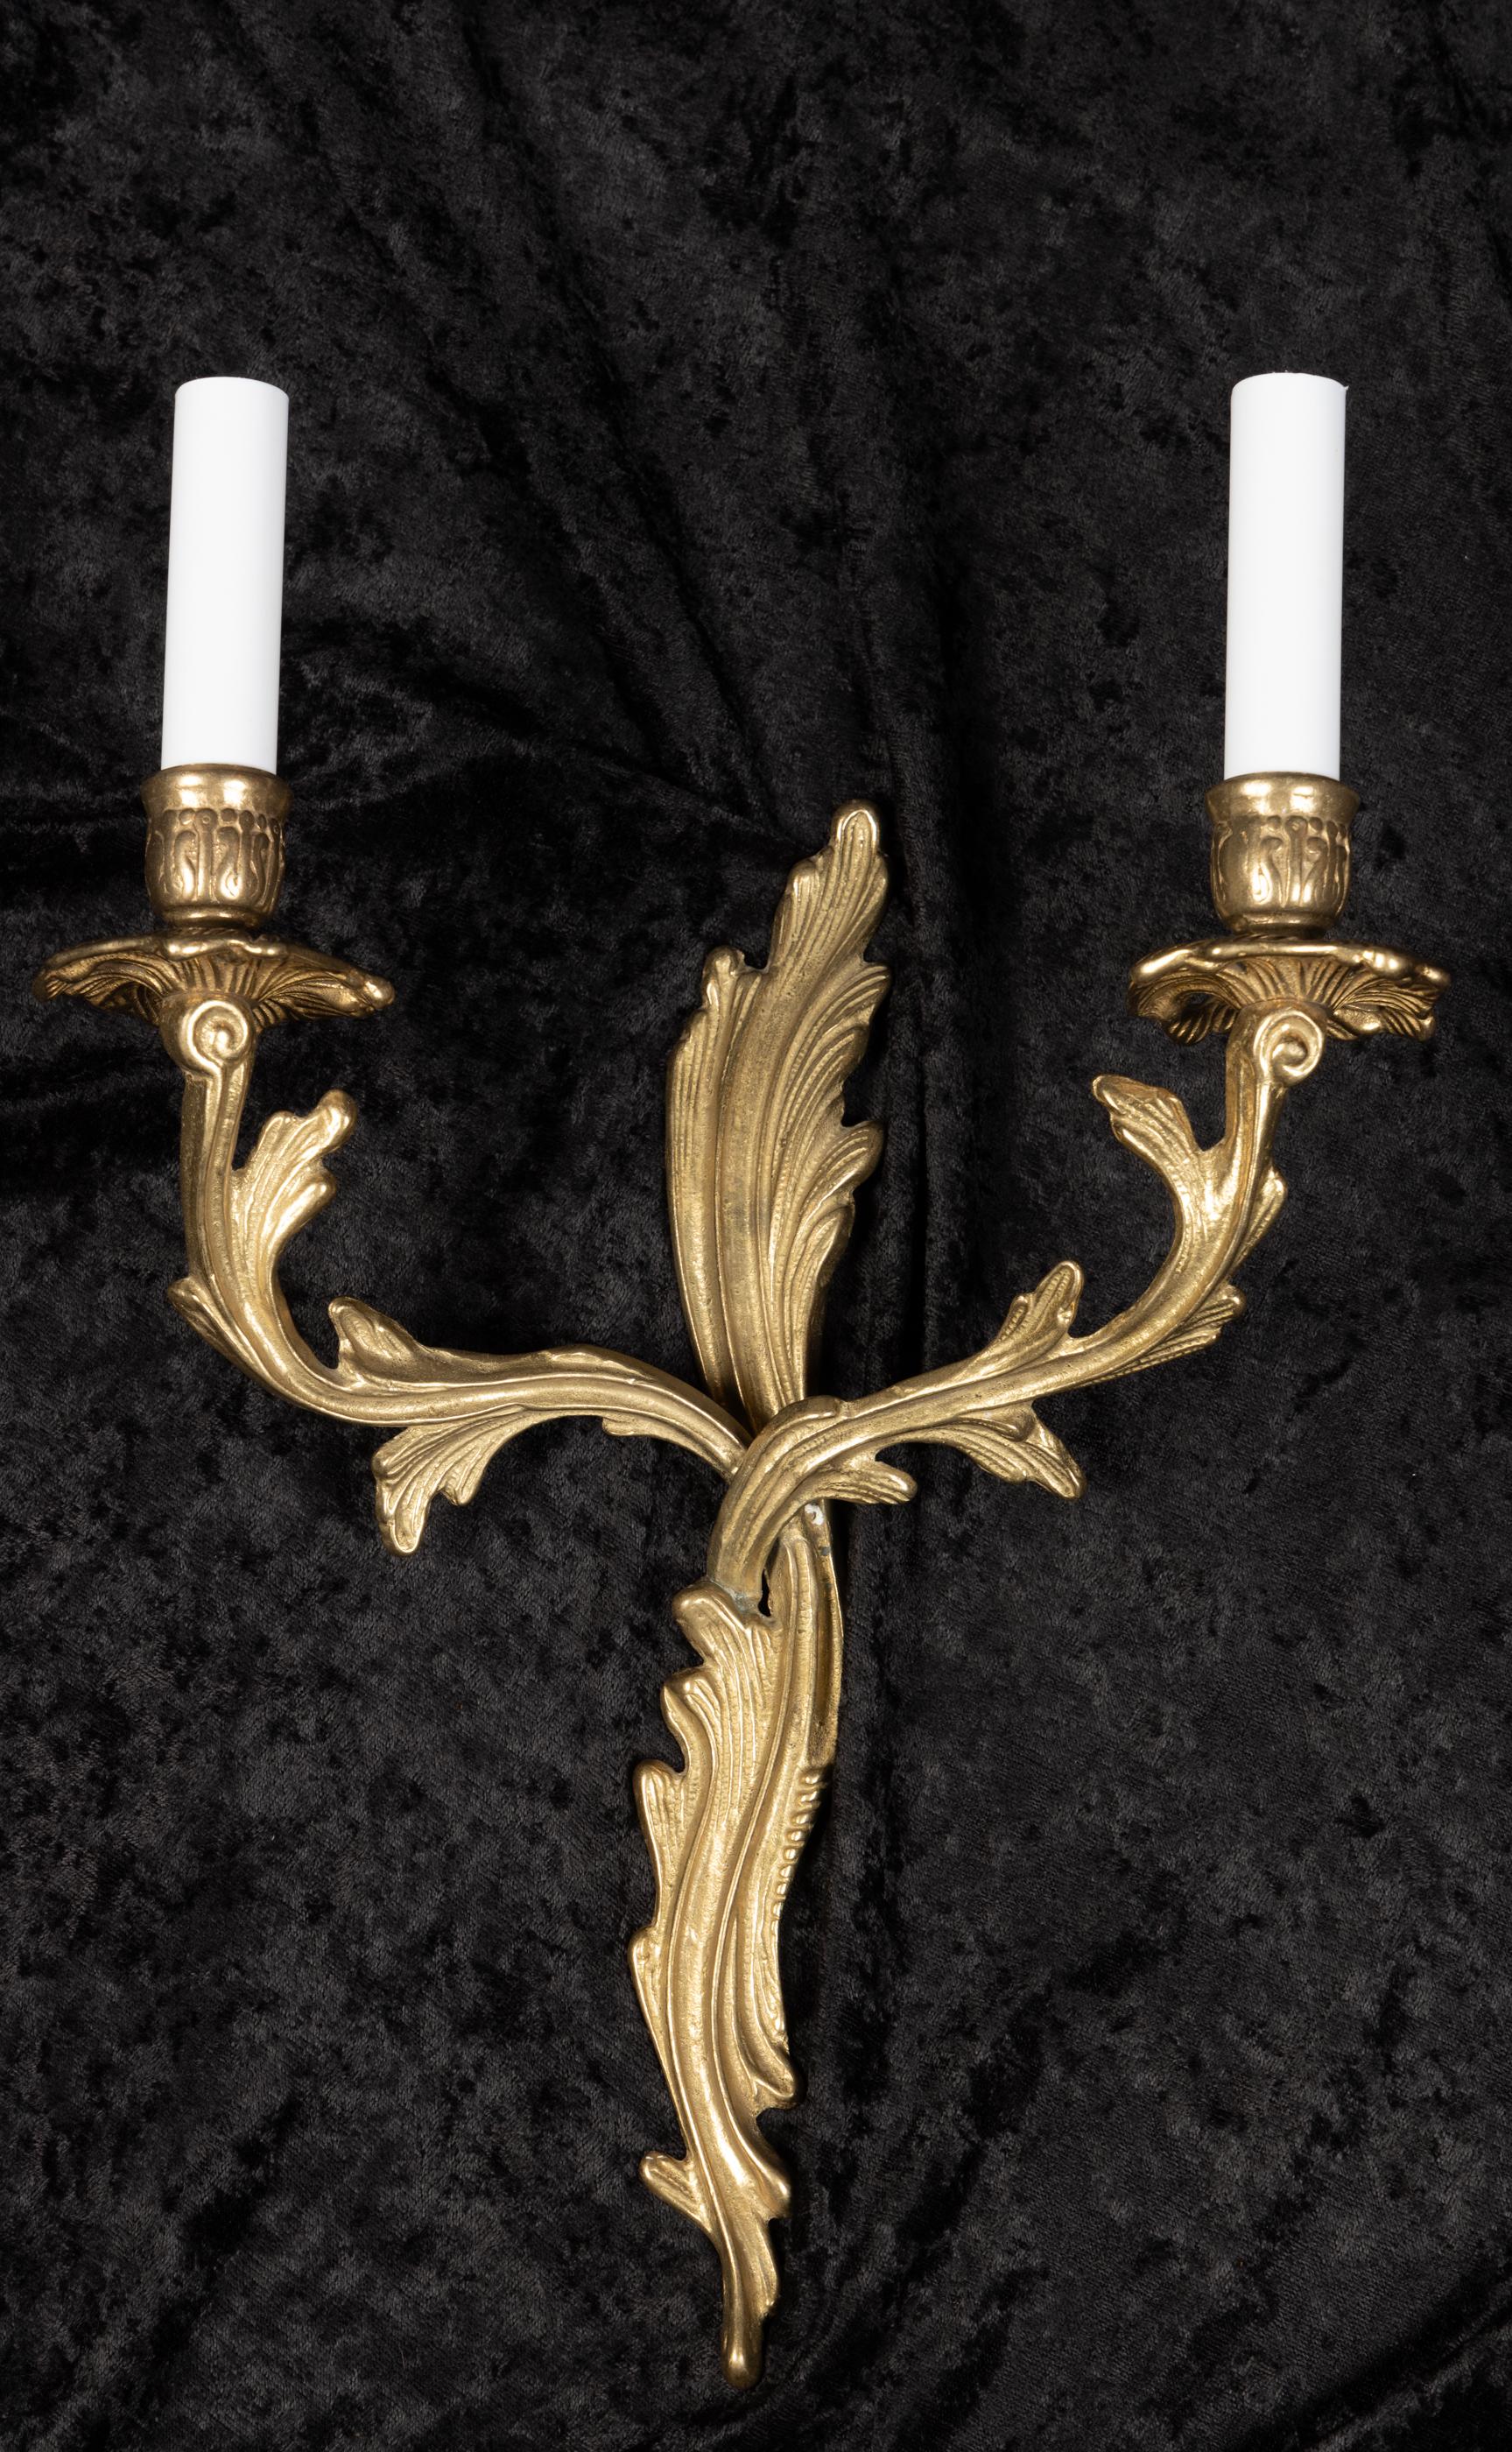 Beautiful pair of French two light sconces crafted in the Rococo style. The bronze pair dates back to the mid-20th century.

The price is for the pair which is sold and shipped together.

Each piece in our shop is professionally rewired and in